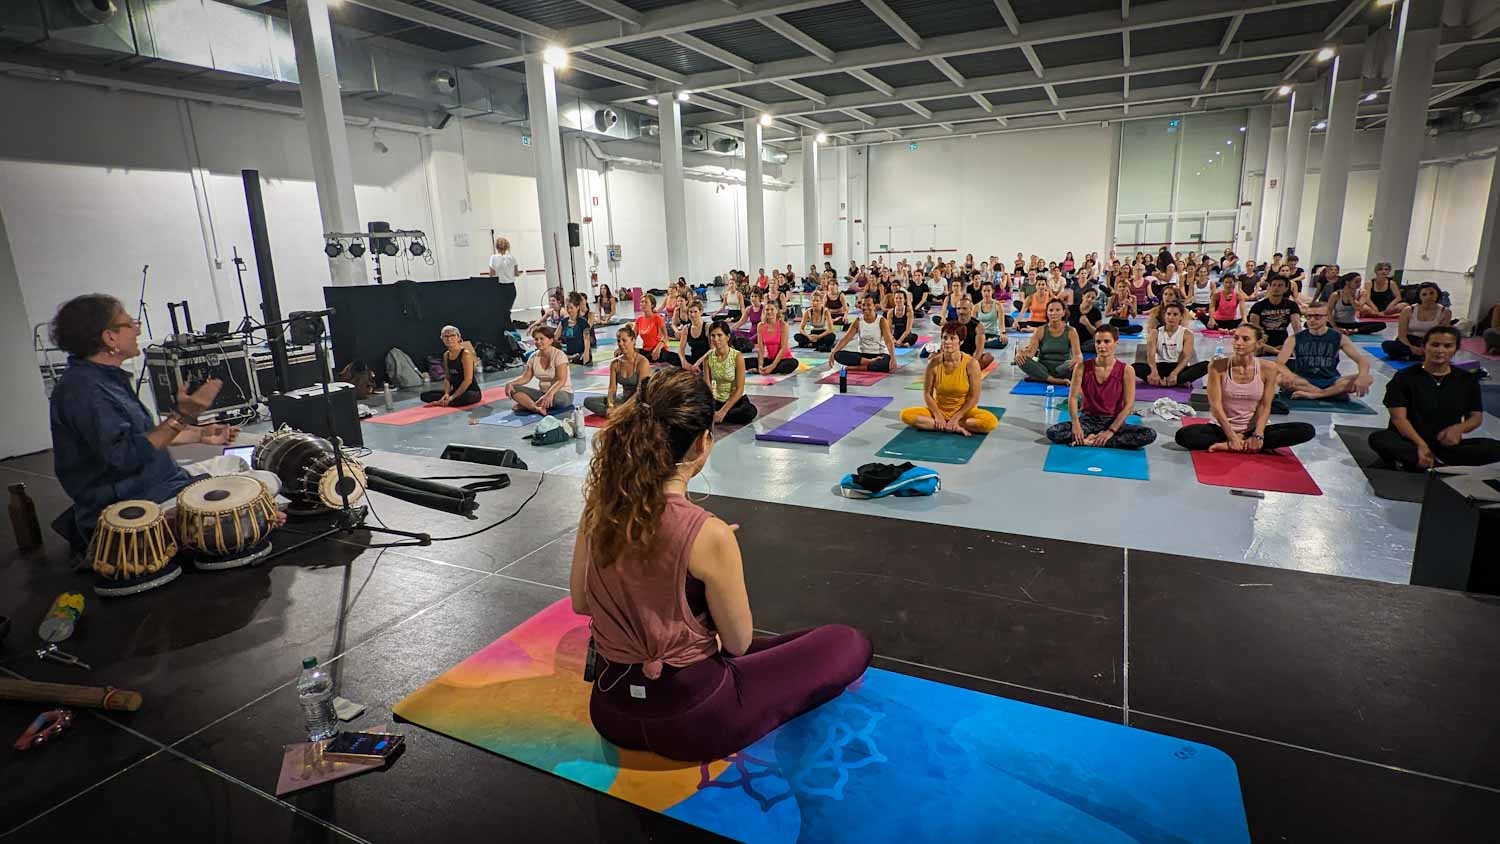 Sara and Nicola teaching at Yoga Festival Milan, last weekend. Now we’re home again. This time to stay. Well, not forever, but at least longer than a week. I’m happy to be home as I can’t wait to go for a run.